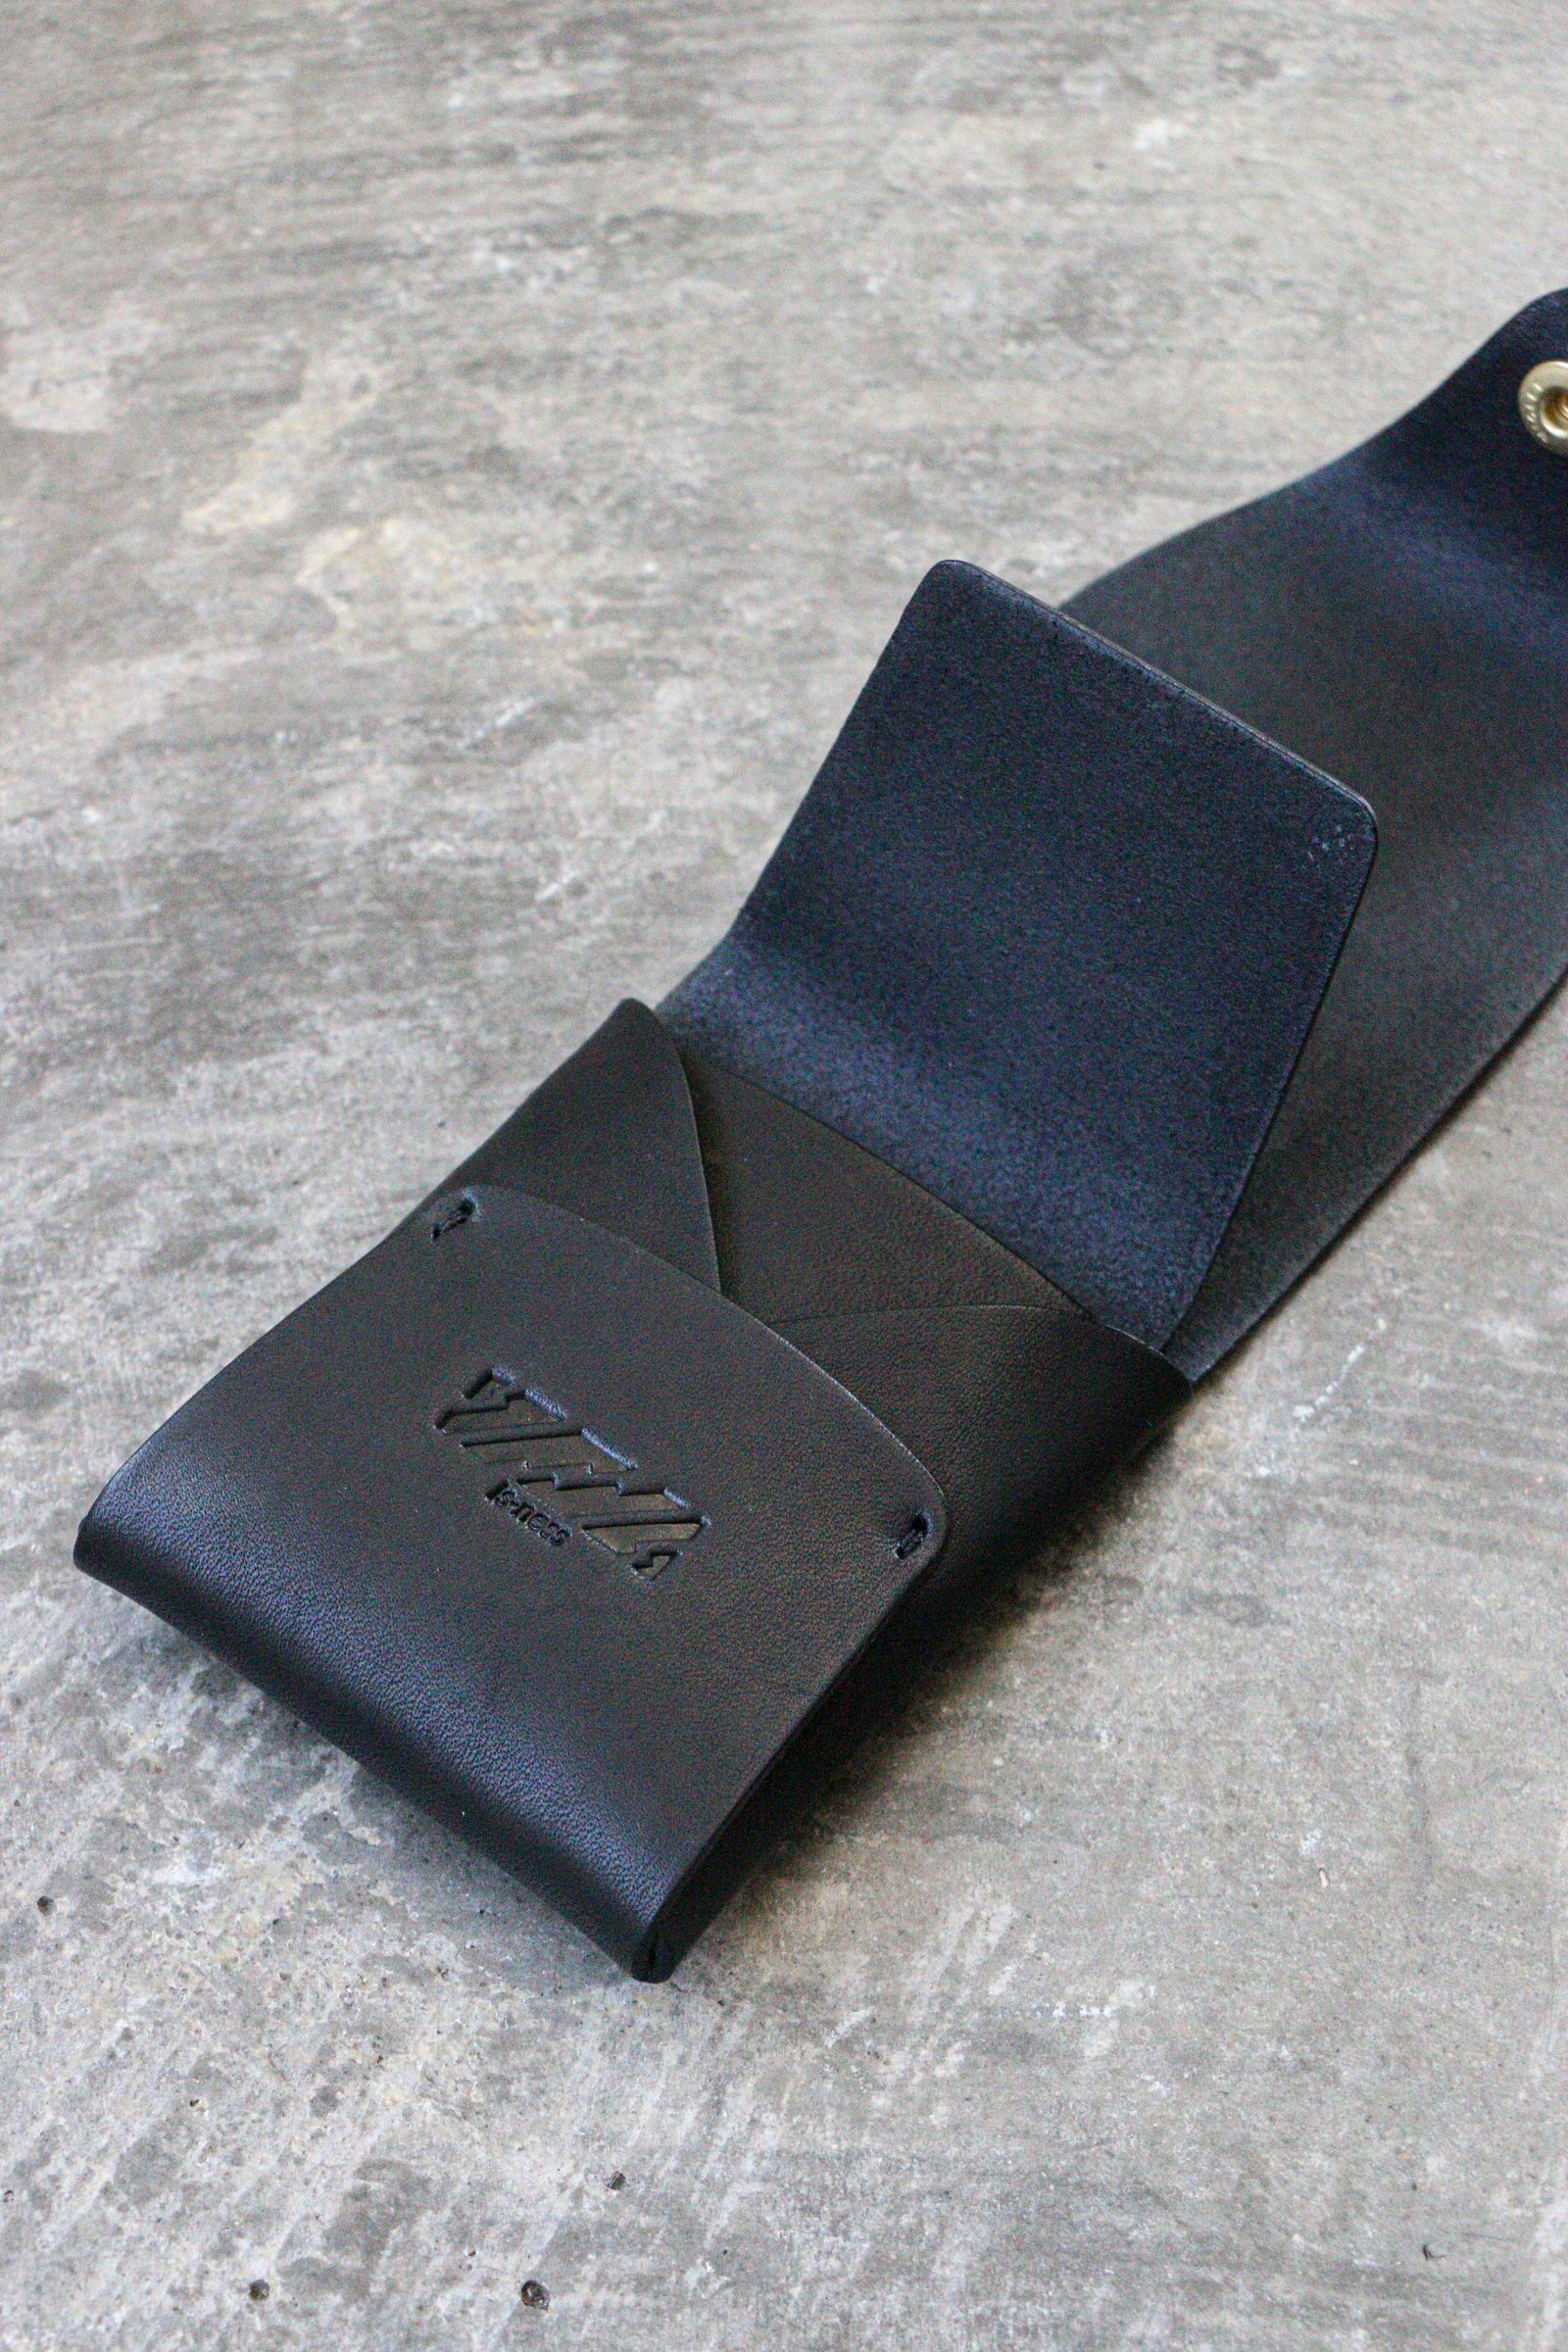 is-ness - LEATHER WALLET BLACK / コンパクトウォレット / 財布 | koko